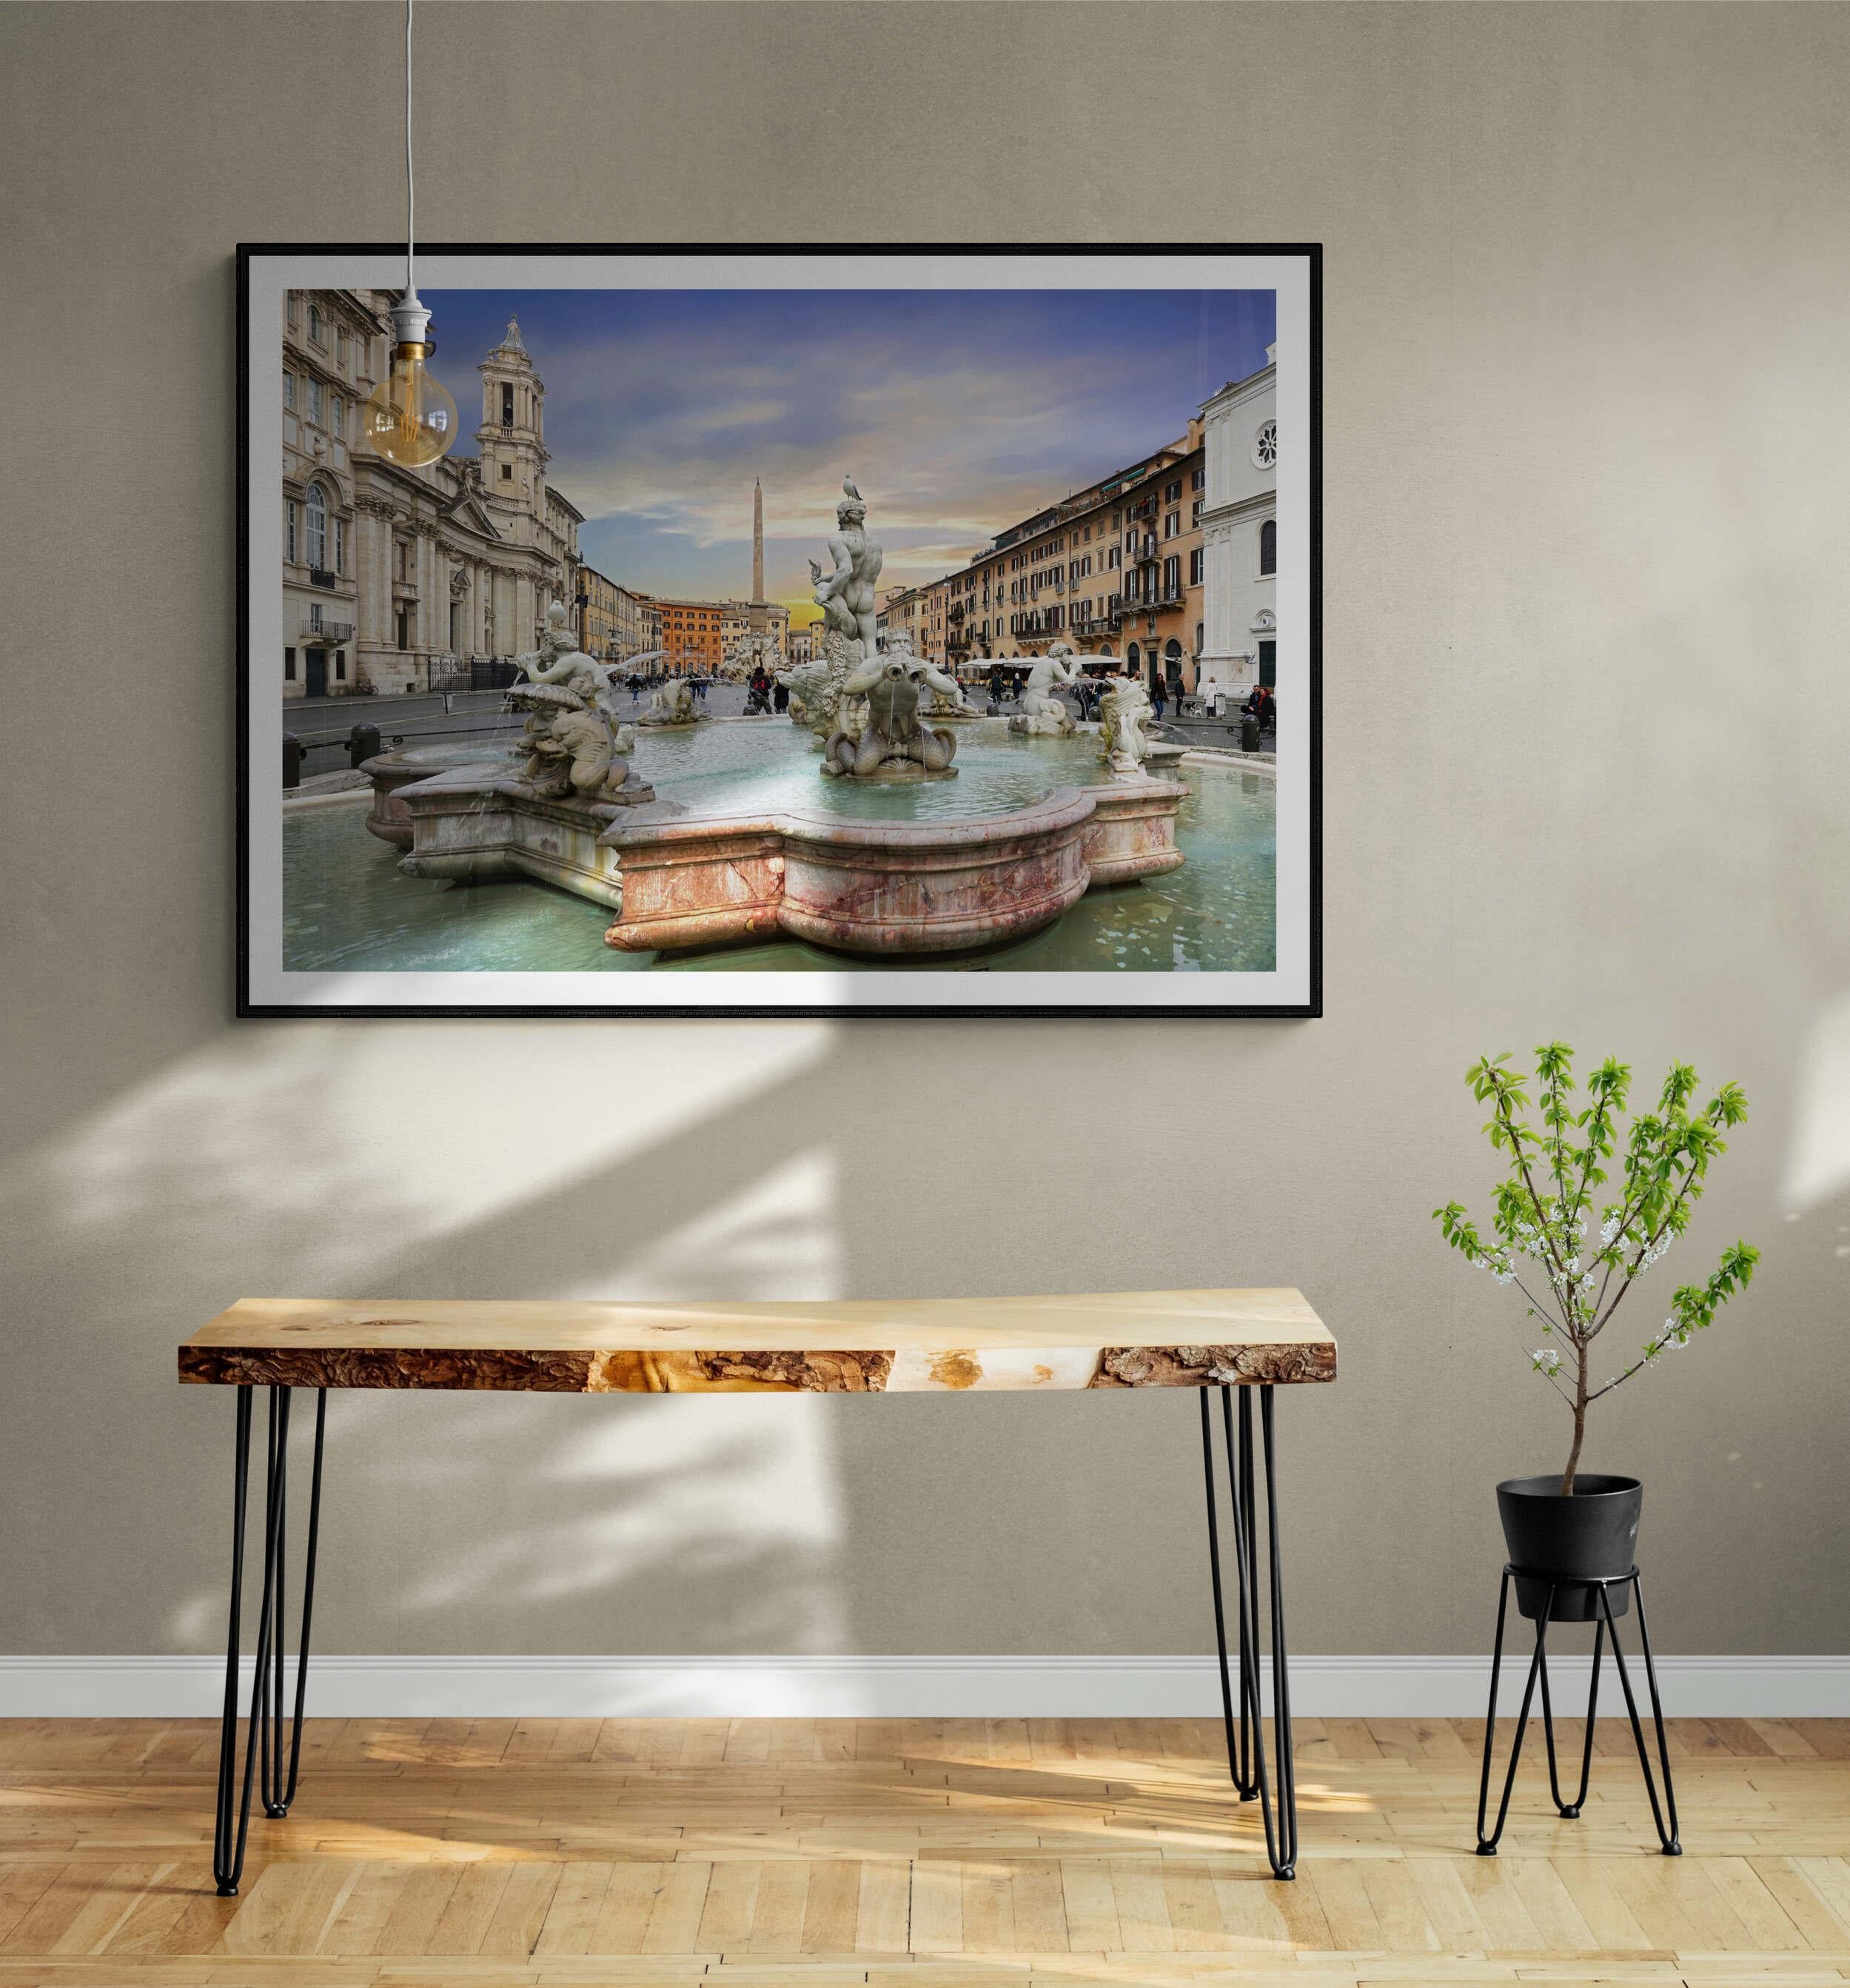 The Piazza Navona, Roma - Italy 2019 - Full Framed Panoramic Color Photography For Sale 2